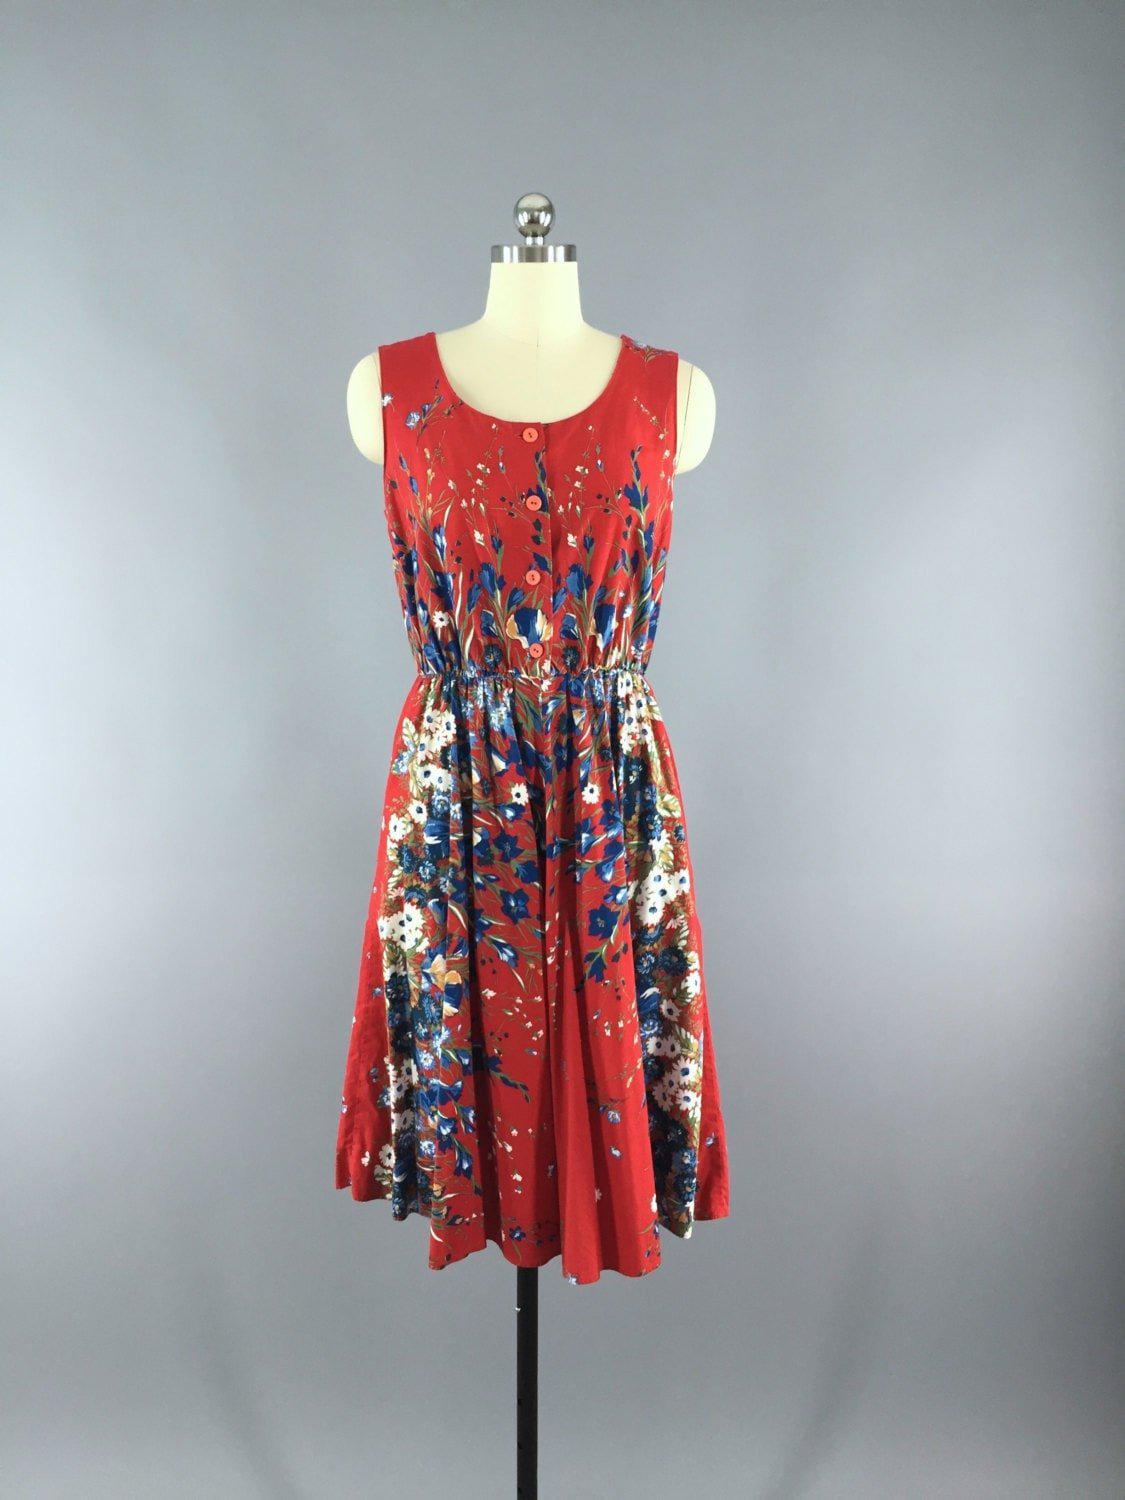 Vintage 1950s Cotton Sundress / Red Floral Print - ThisBlueBird